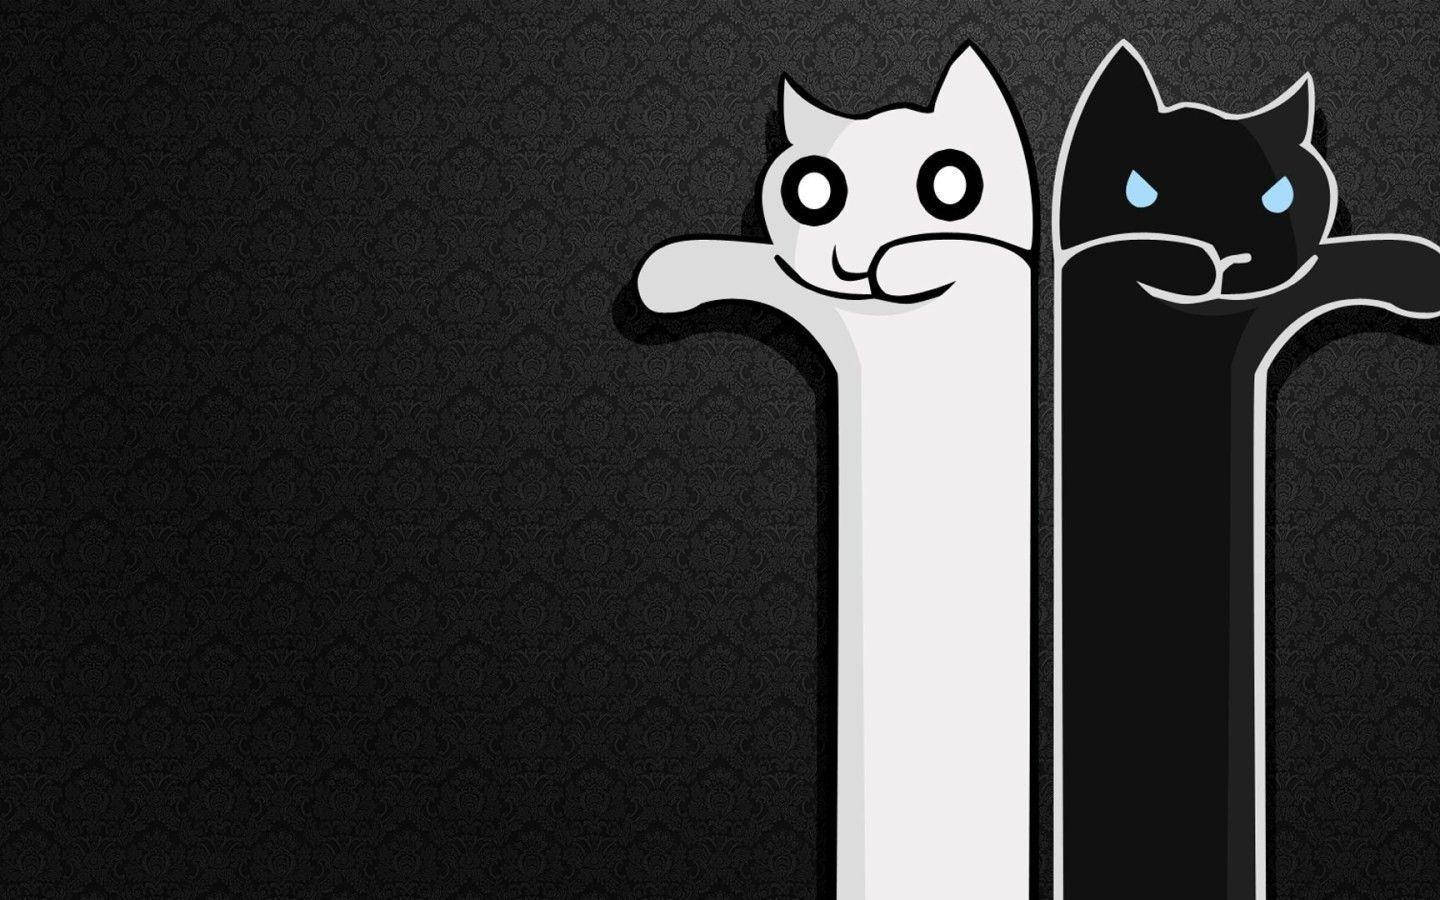 Illustration Of Two Black And White Cats Wallpaper